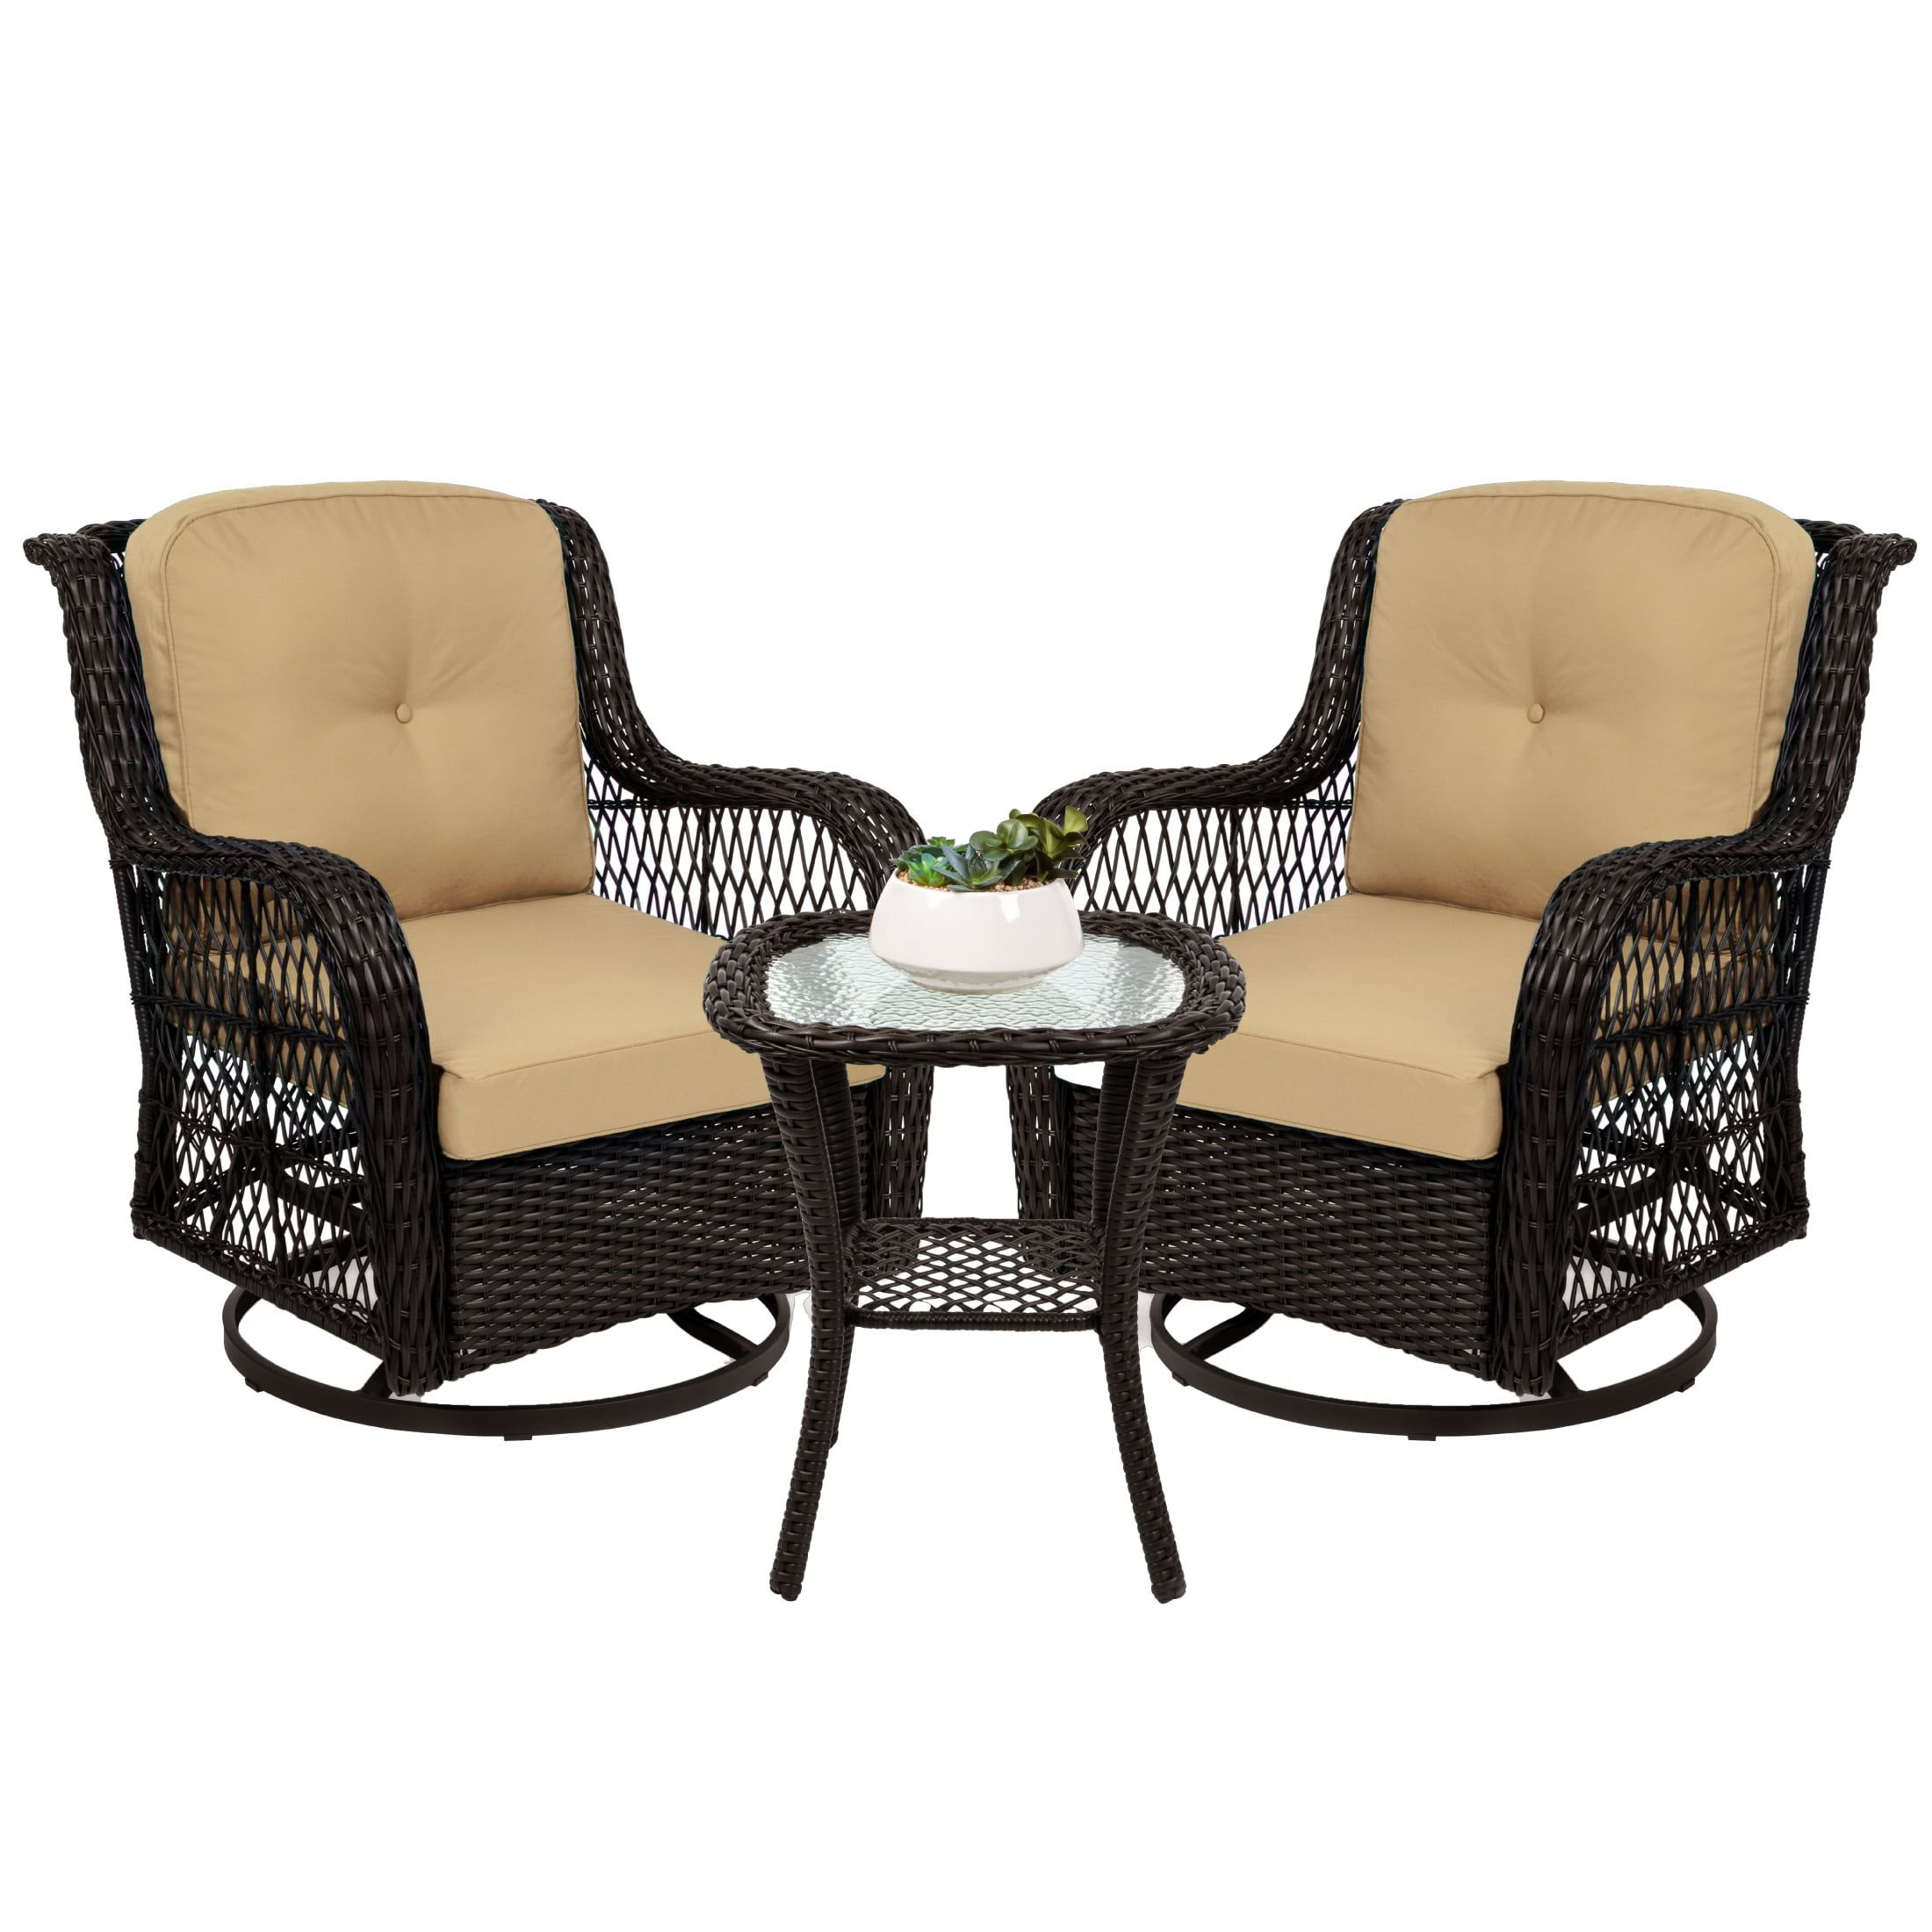 Well Known Rocking Chairs Wicker Patio Furniture Set In Best Choice Products 3 Piece Patio Wicker Bistro Furniture Set W/ 2  Cushioned Swivel Rocking Chairs, Side Table – Rust – Walmart (View 9 of 15)